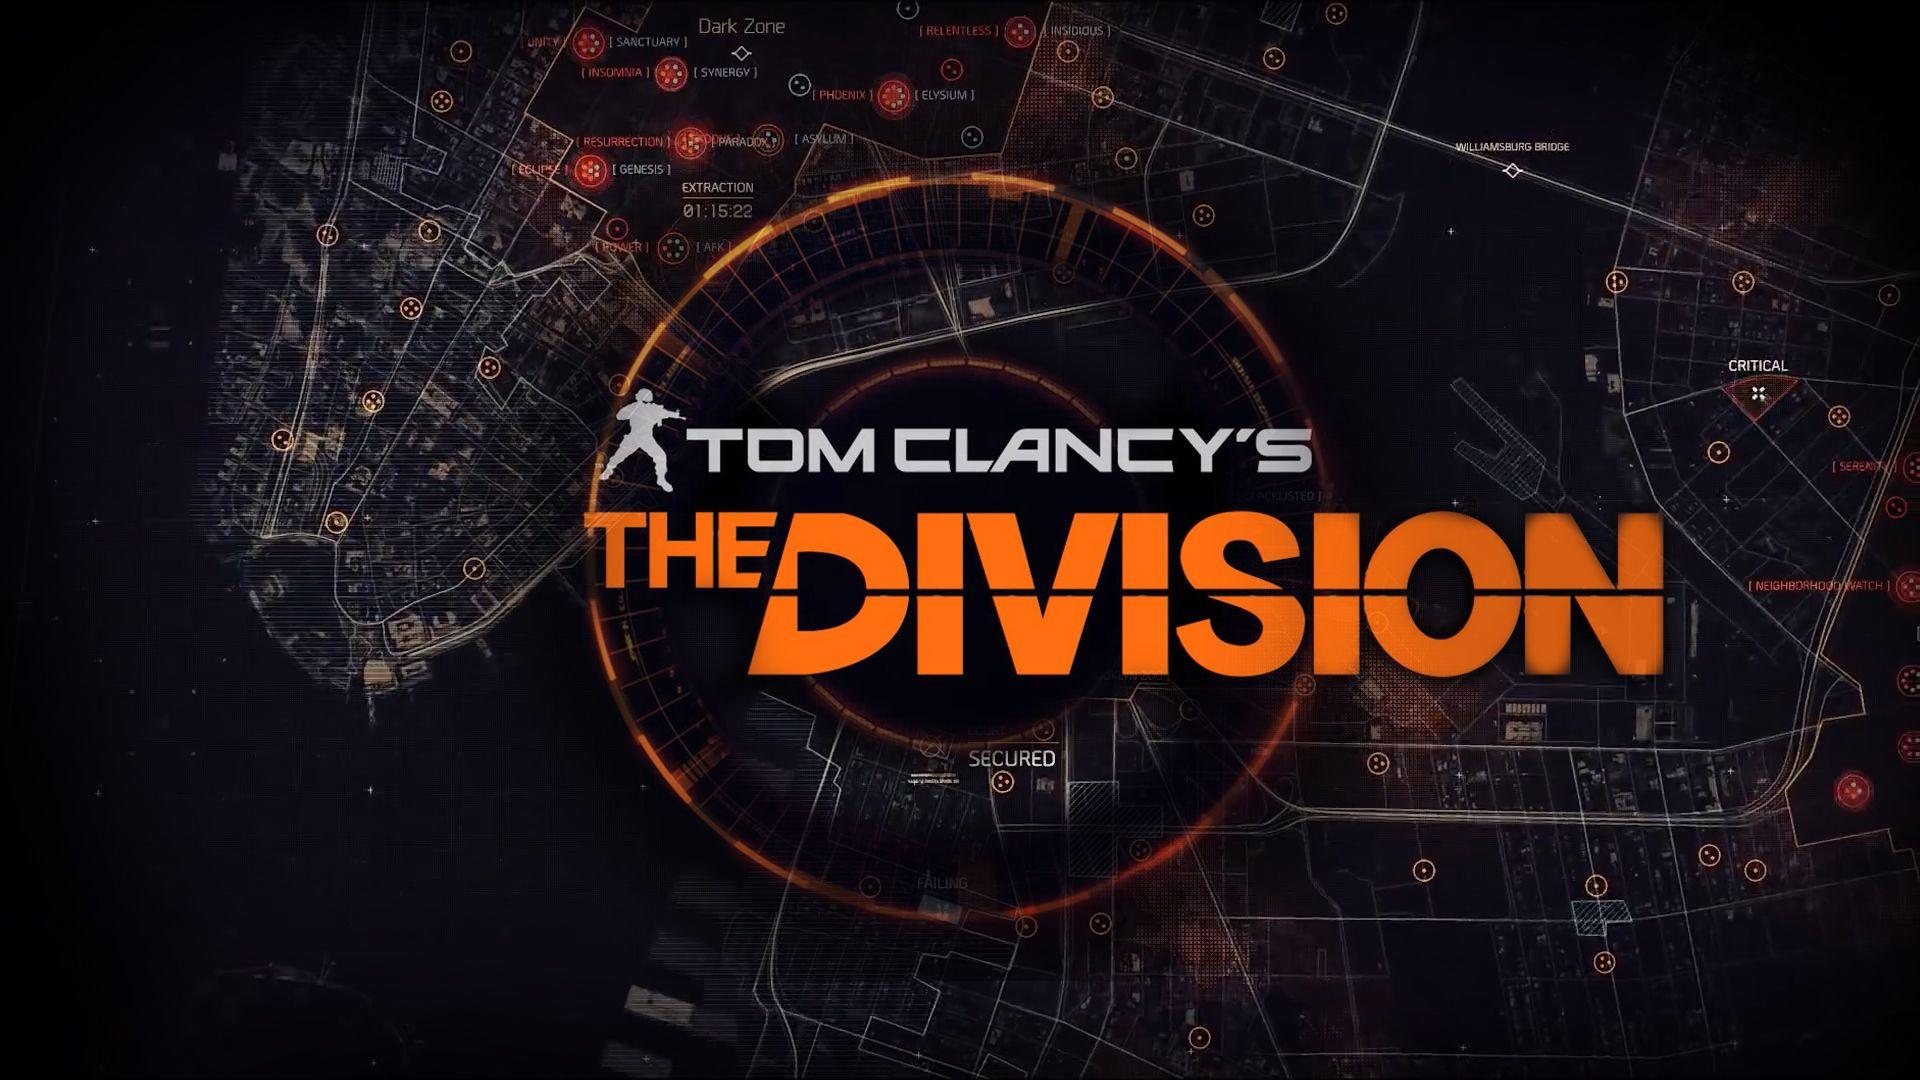 Tom Clancy's the Division Logo - Tom Clancy's The Division Big Logo | Video Games | Pinterest